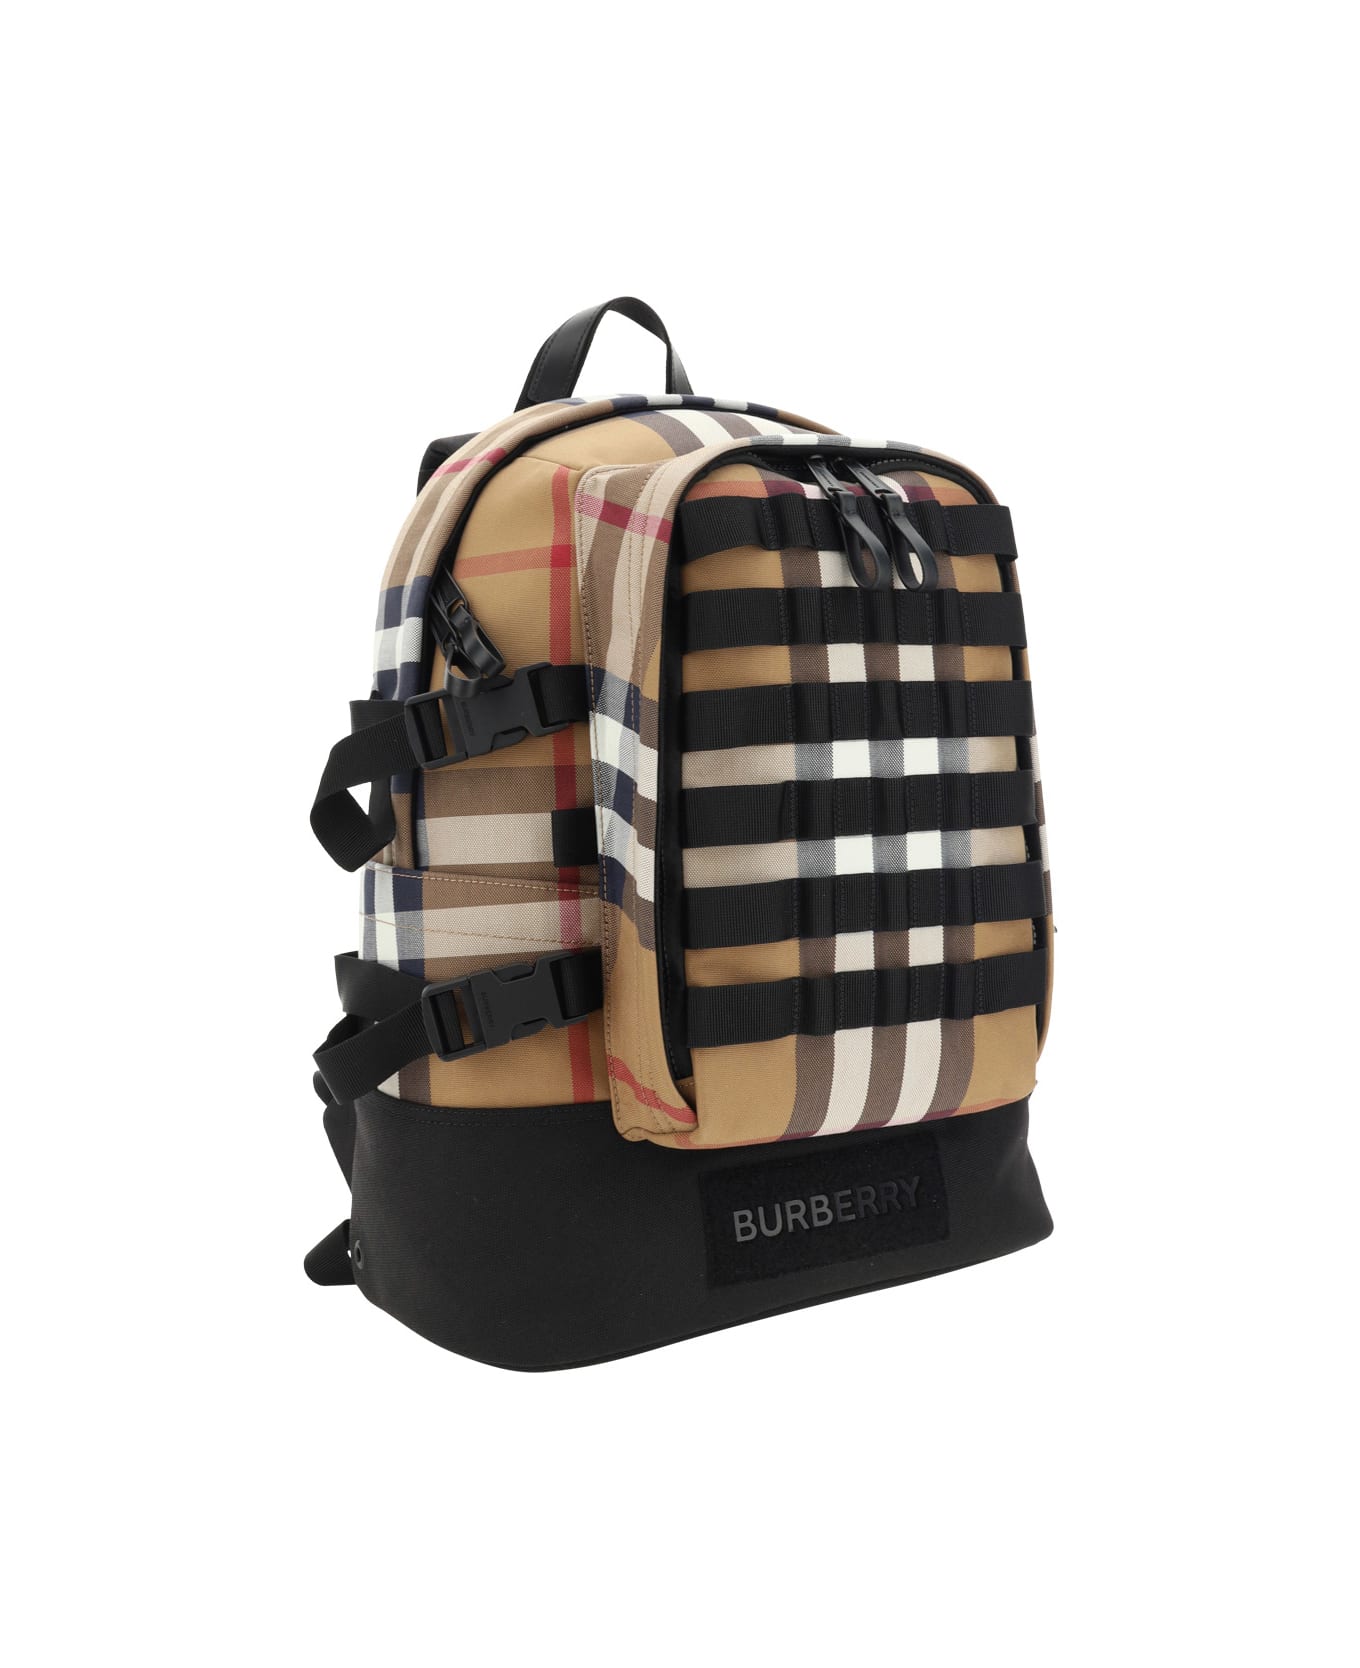 Burberry Jack Backpack - Boston grained leather bag